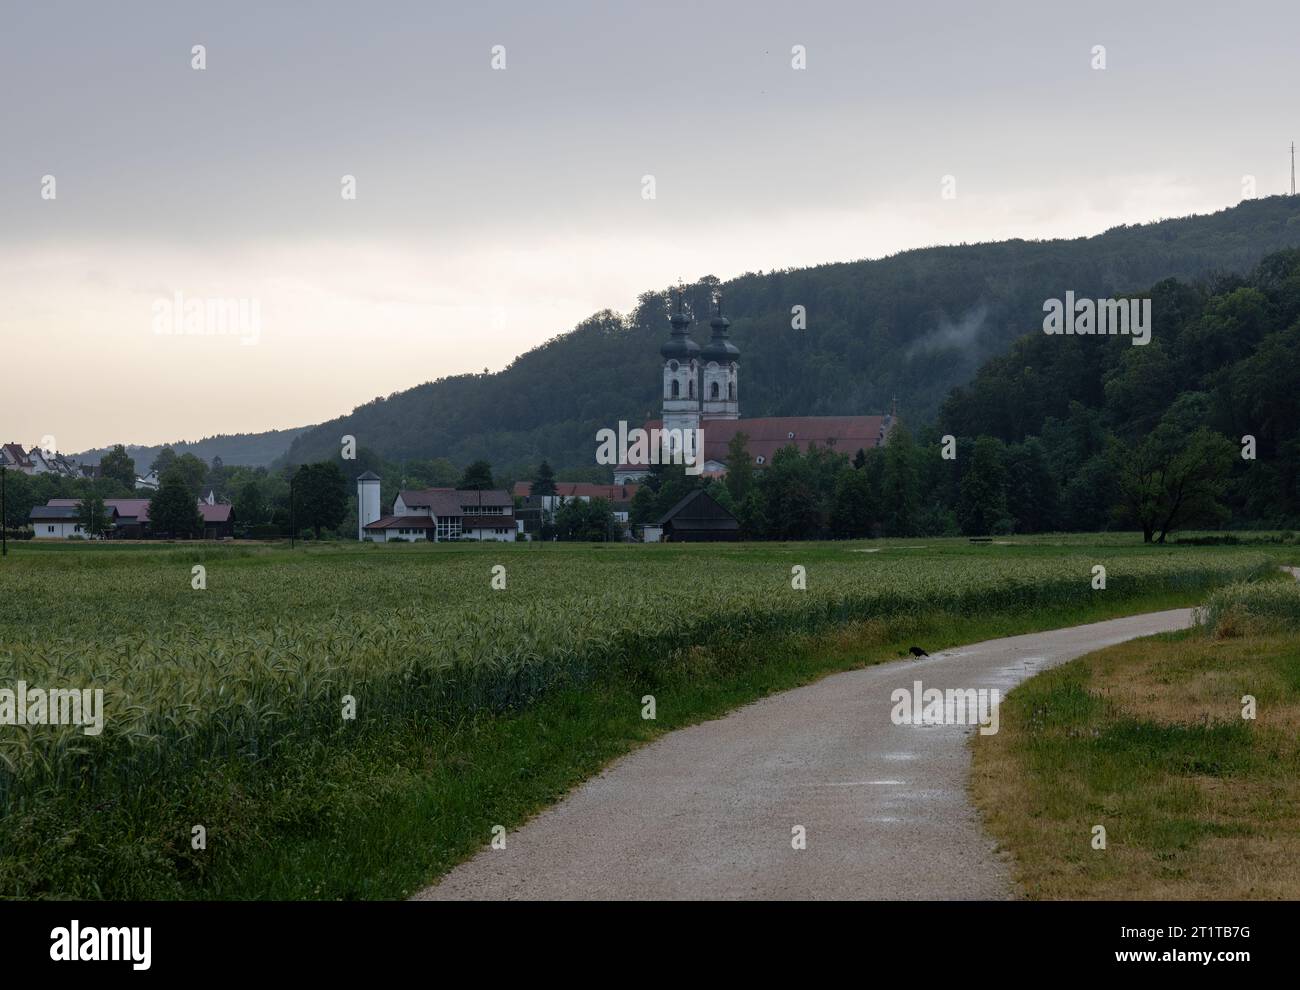 old historic rural church with two onion domes, fir forest with clouds in the background Stock Photo